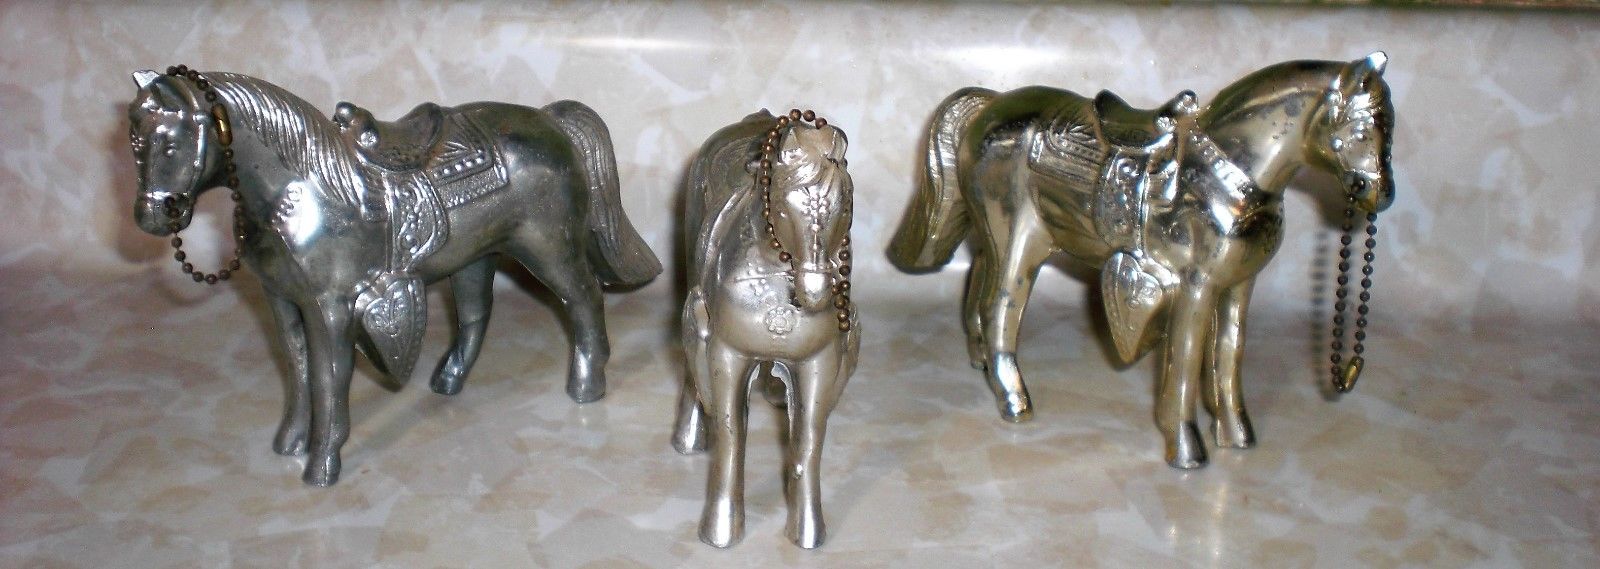 Carnival Horse Silver Colored Pot Metal Cast Metal Prize Lot of 3